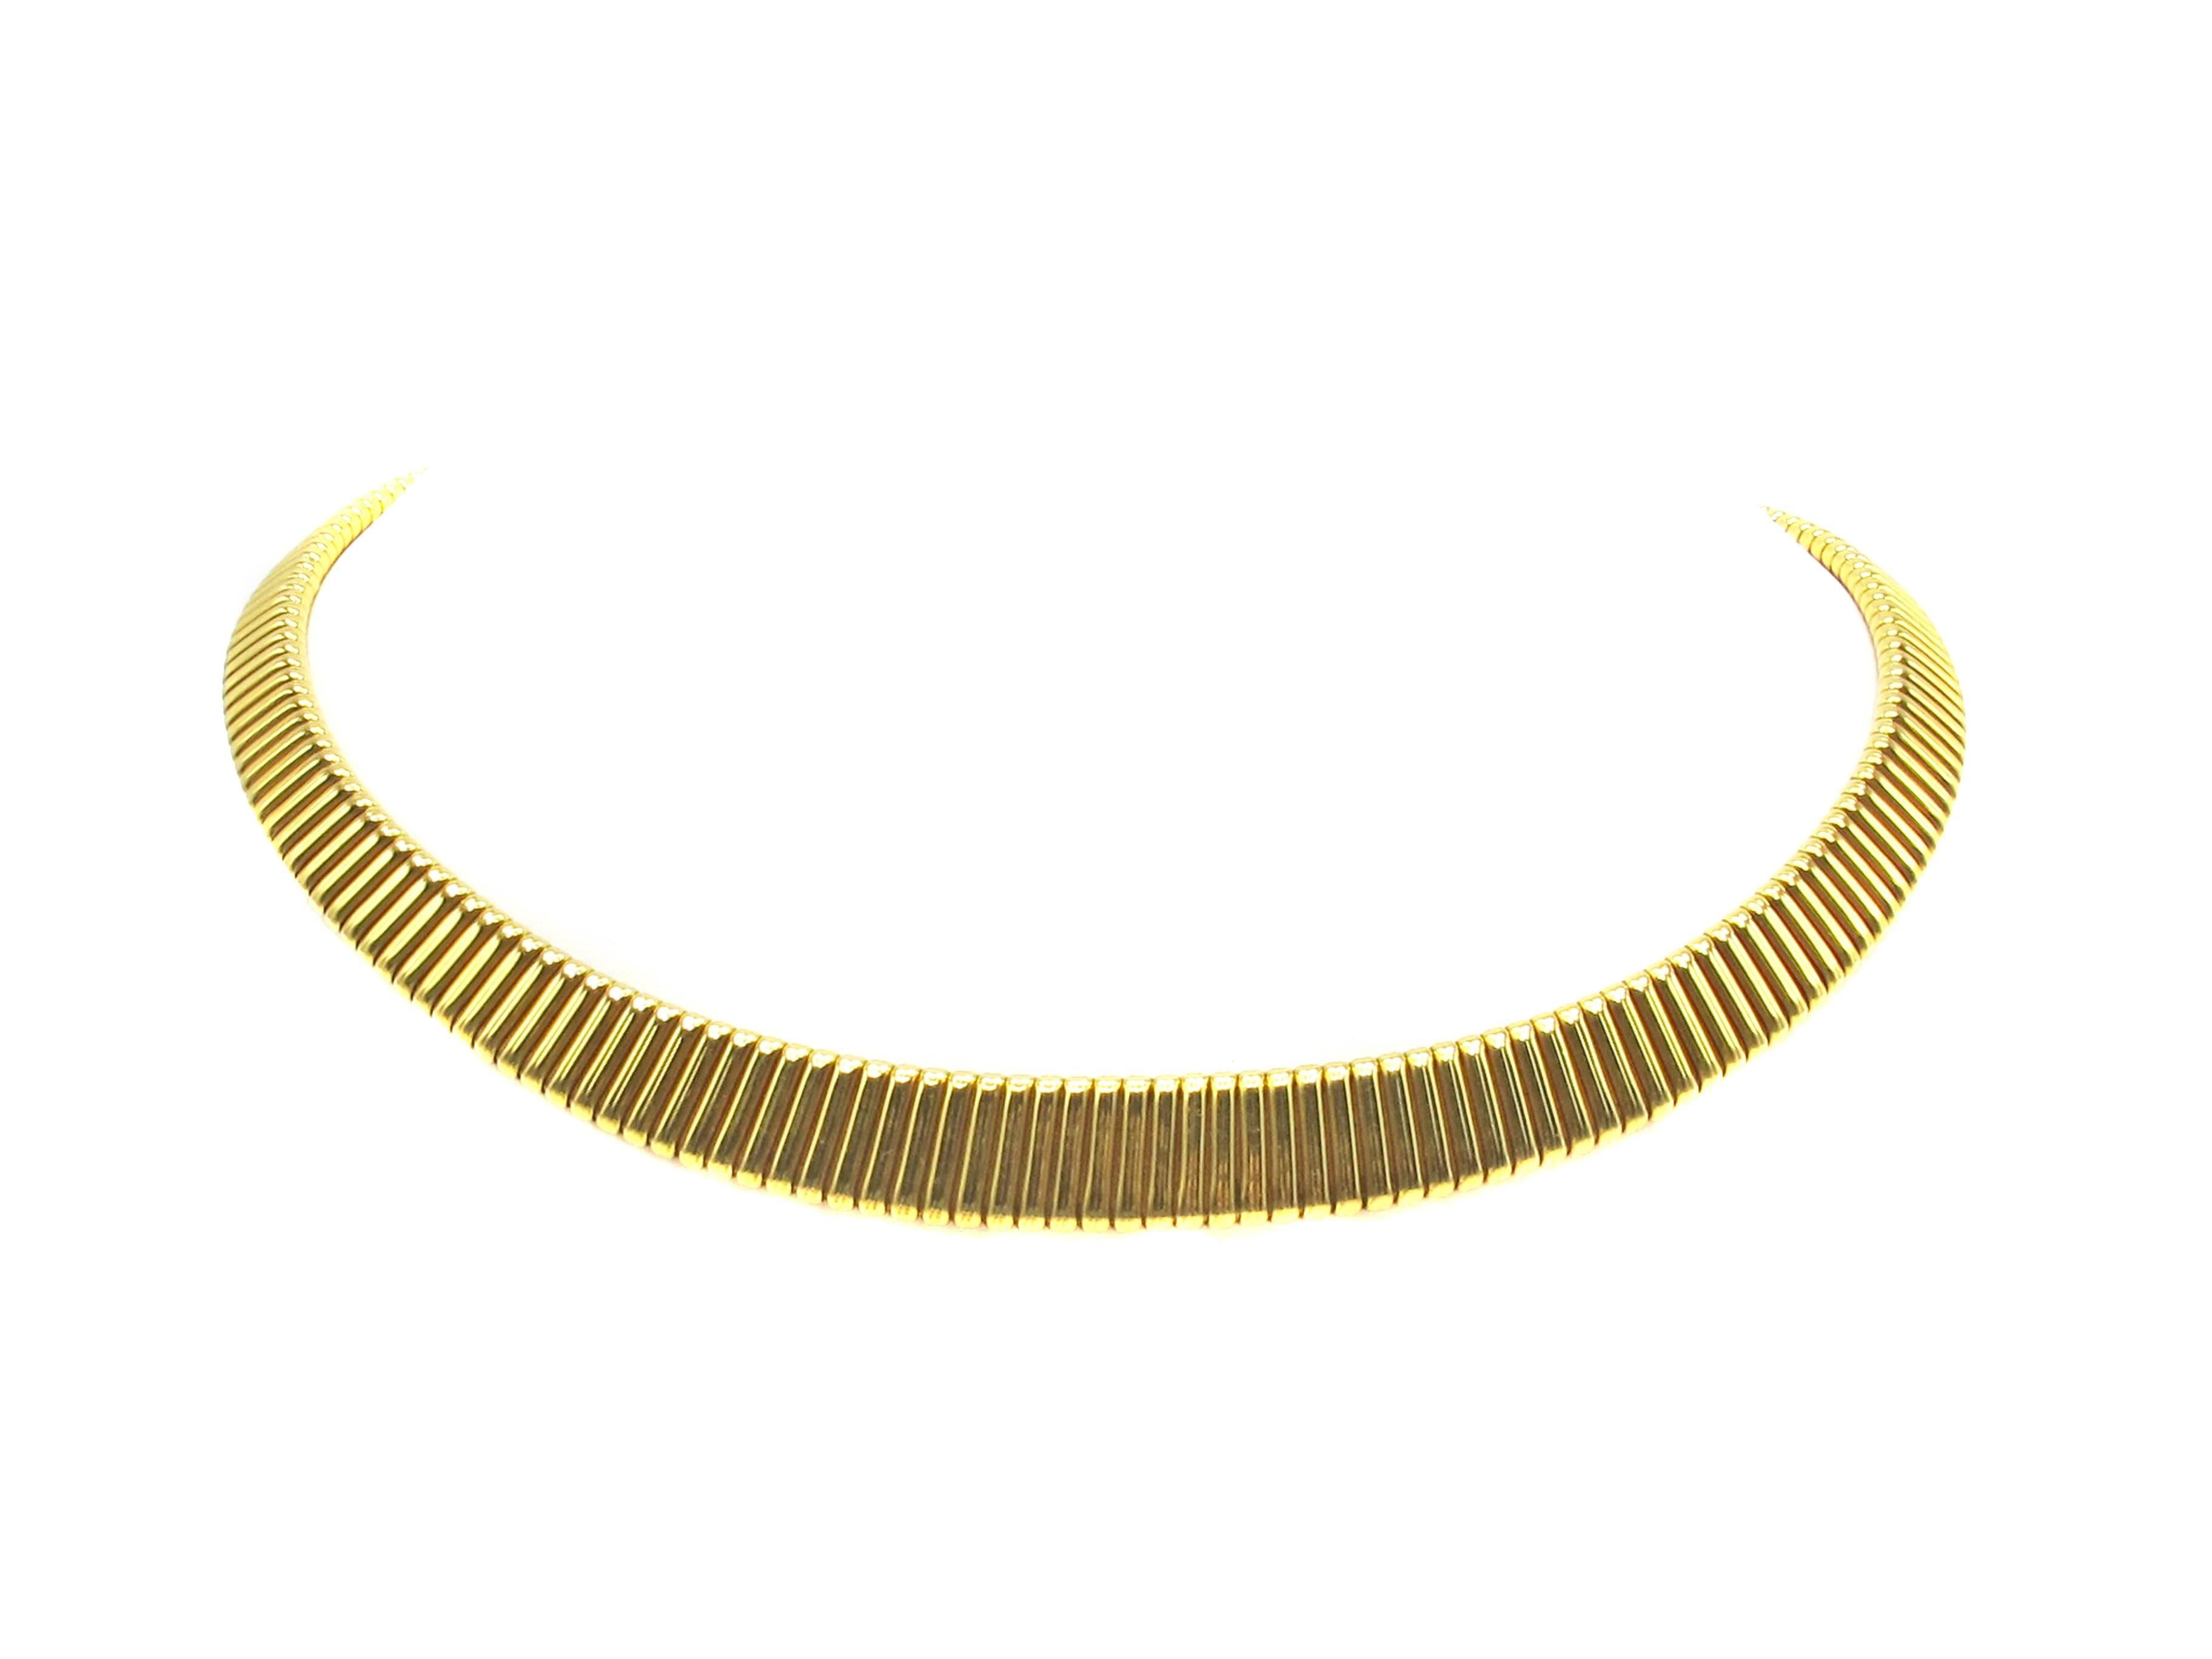 Finely handcrafted 18 Karat yellow gold French Retro Goose-neck choker from ca. 1945. This extremely wearable and comfortable choker goes well with any attire and occasion. Be it with a pair of fancy jeans and top or with an elegant dress on a